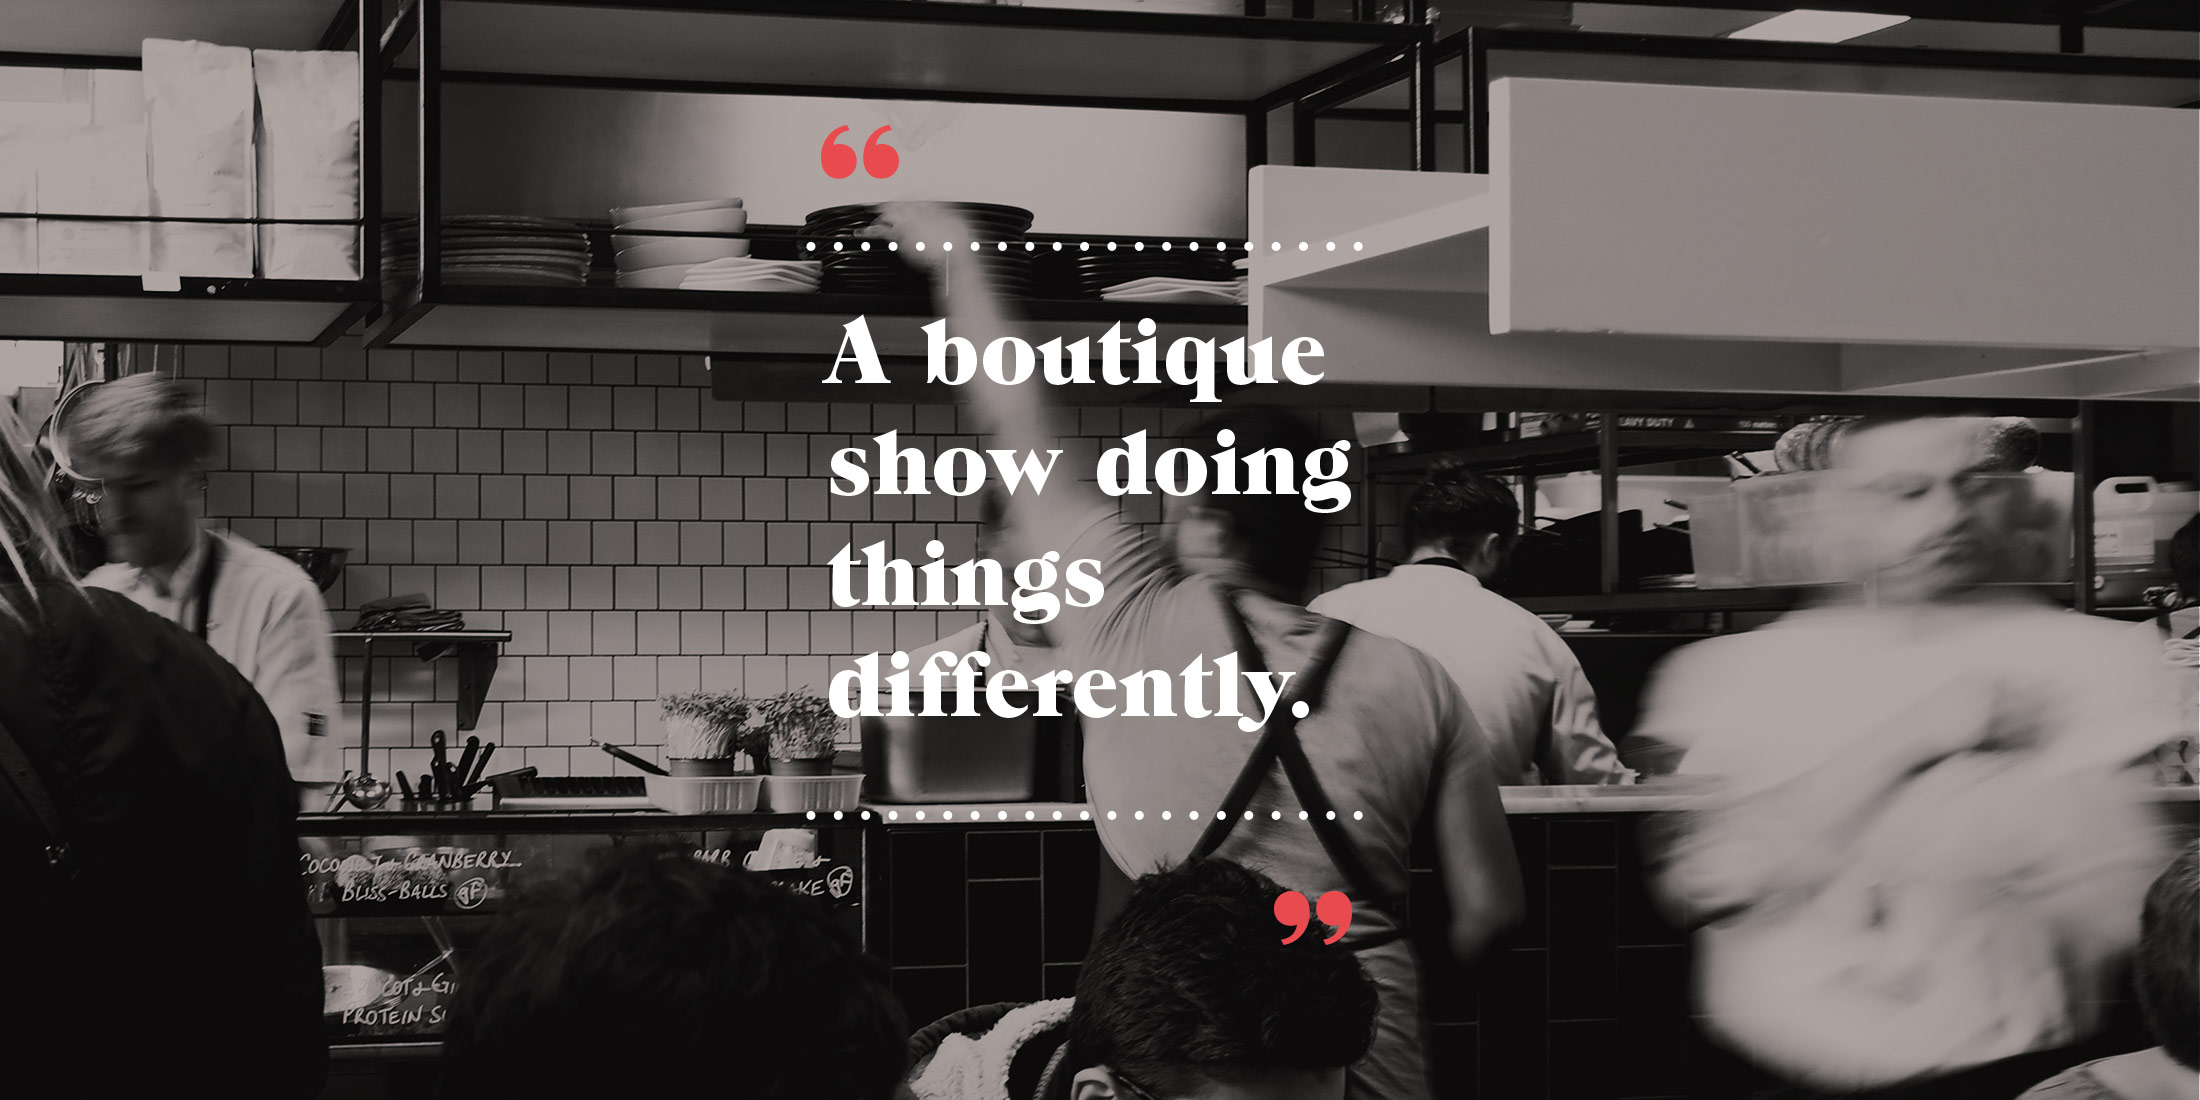 Design Quote A boutique show doing things differently